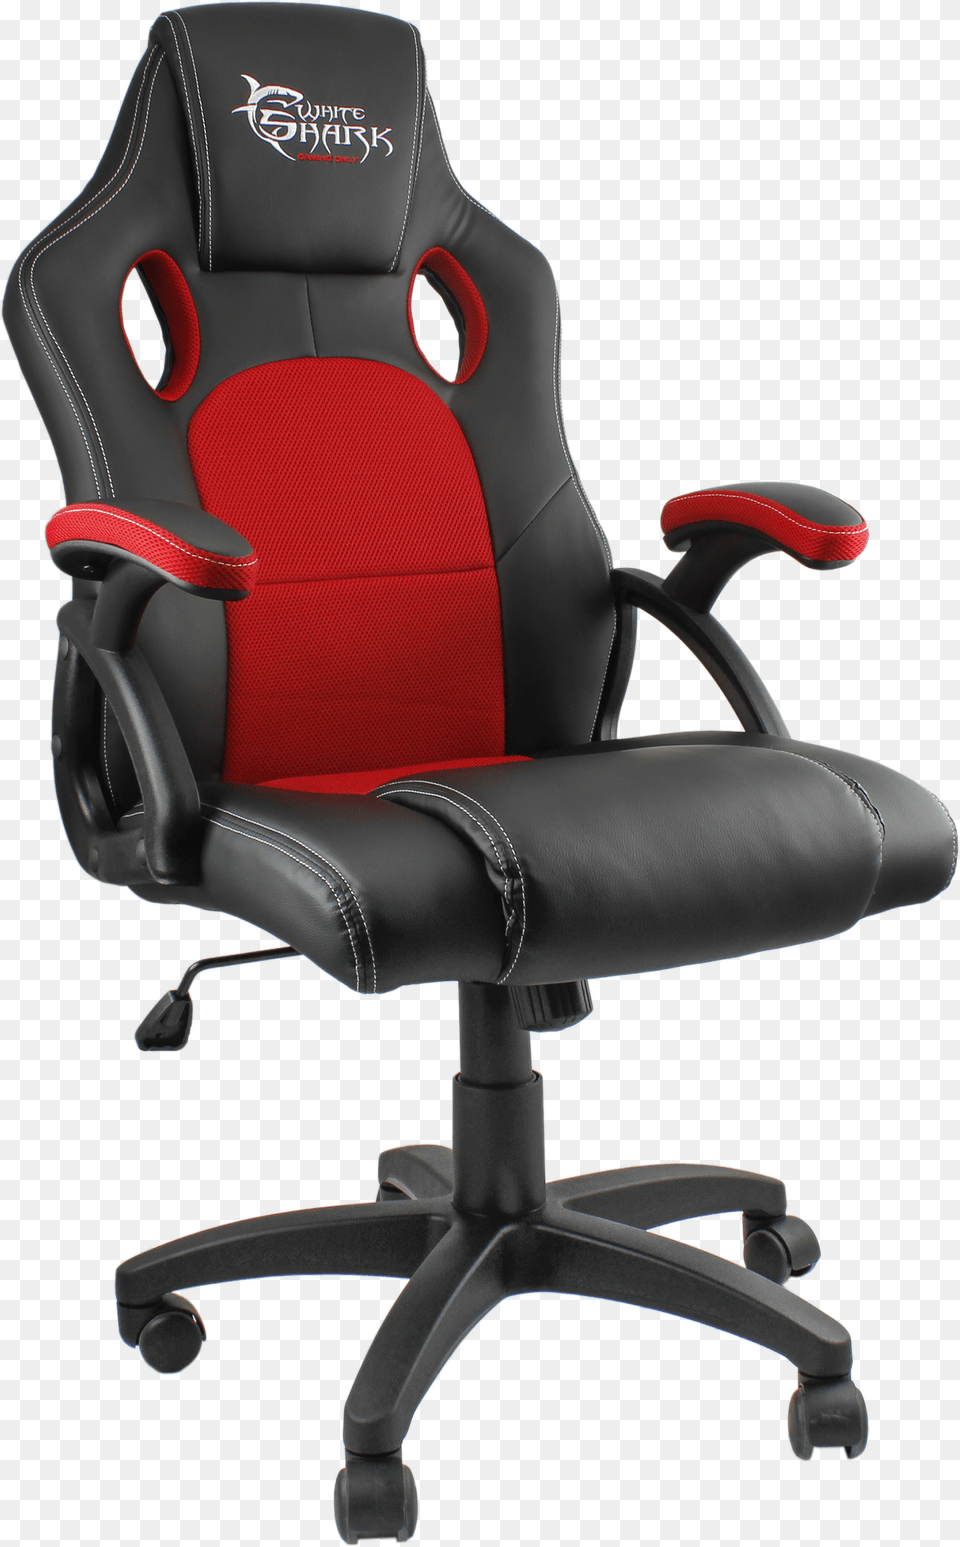 White Shark Gaming Chair Kings Throne Blackred Whiteshark White Shark Gaming Chair, Cushion, Furniture, Home Decor Free Png Download